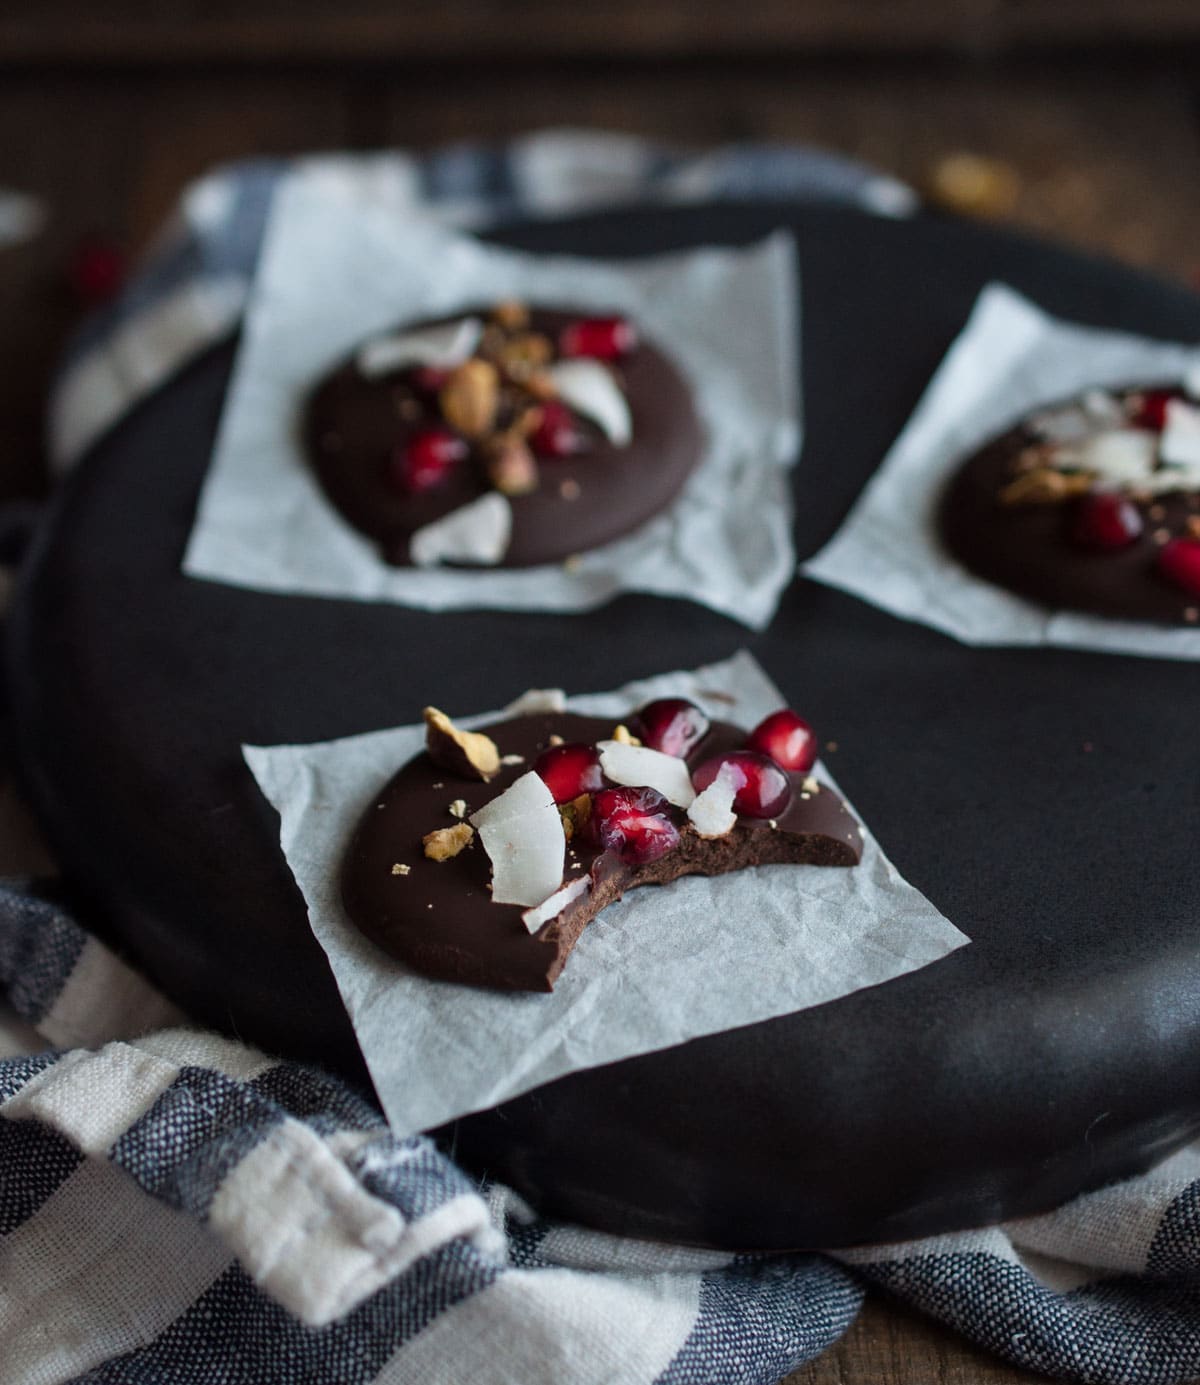 Dark chocolate pomegranate bites are a simple tasty treat to eat or give as Christmas gifts. Made to satisfy a sweet tooth for under 100 calories! 